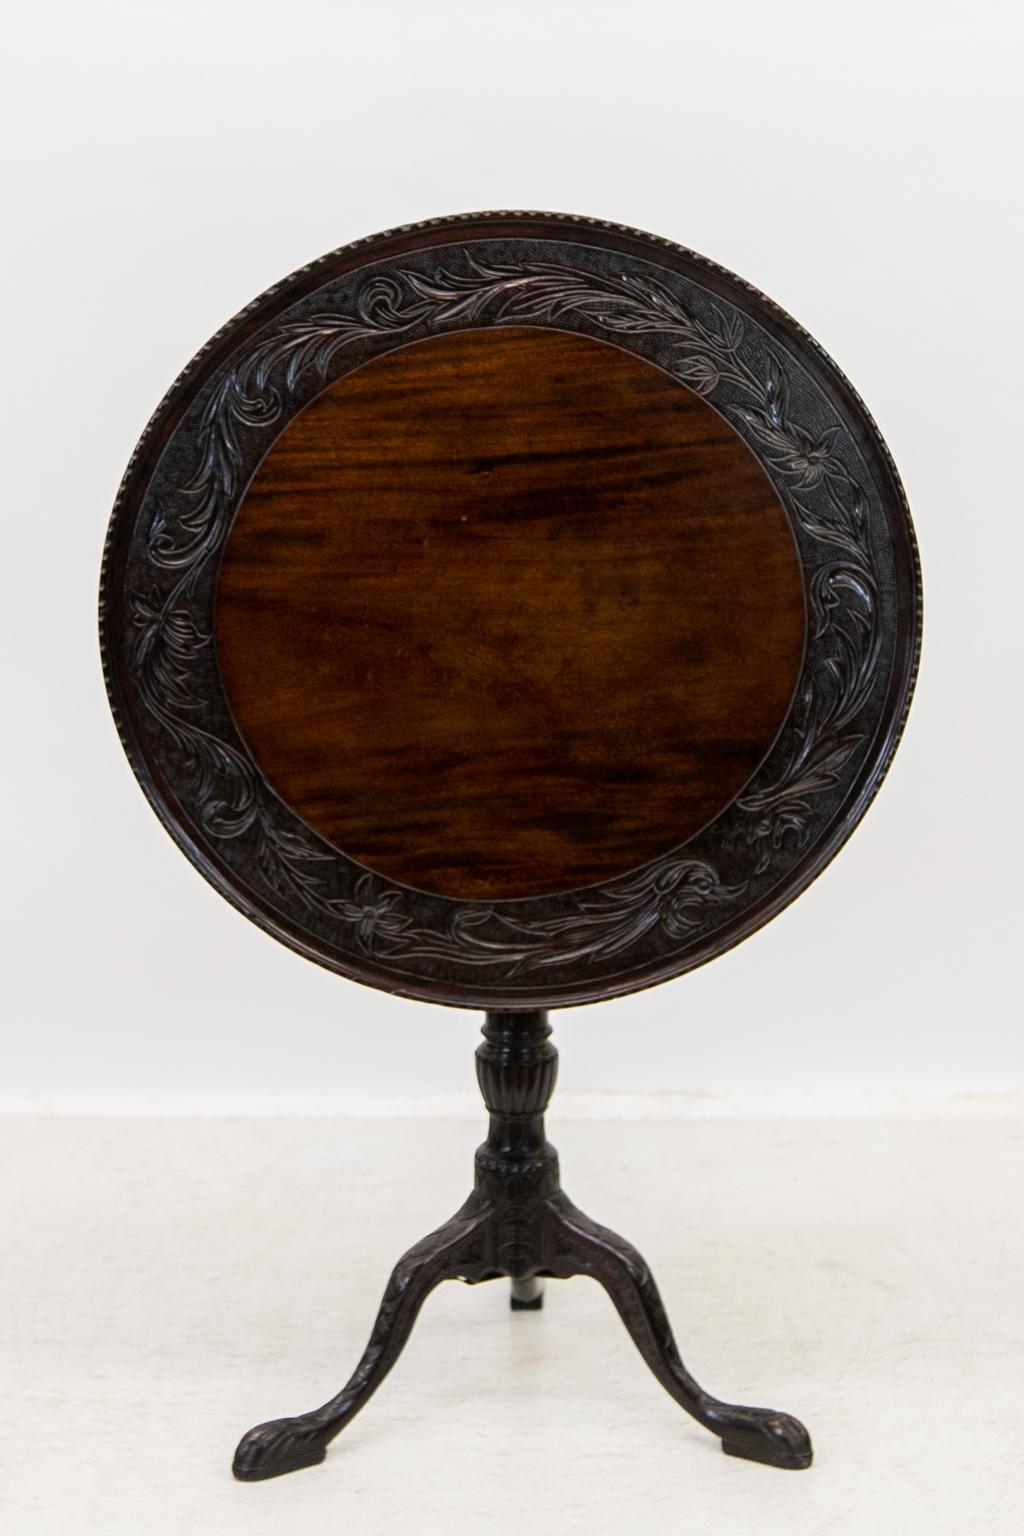 The dish top of this table has a carved repeating notch pattern. The inside border is carved with floral and leaf arabesques on a stipled background. The stem is reeded and has a carved fluted knop. The legs are carved from the knee to the toe.
   